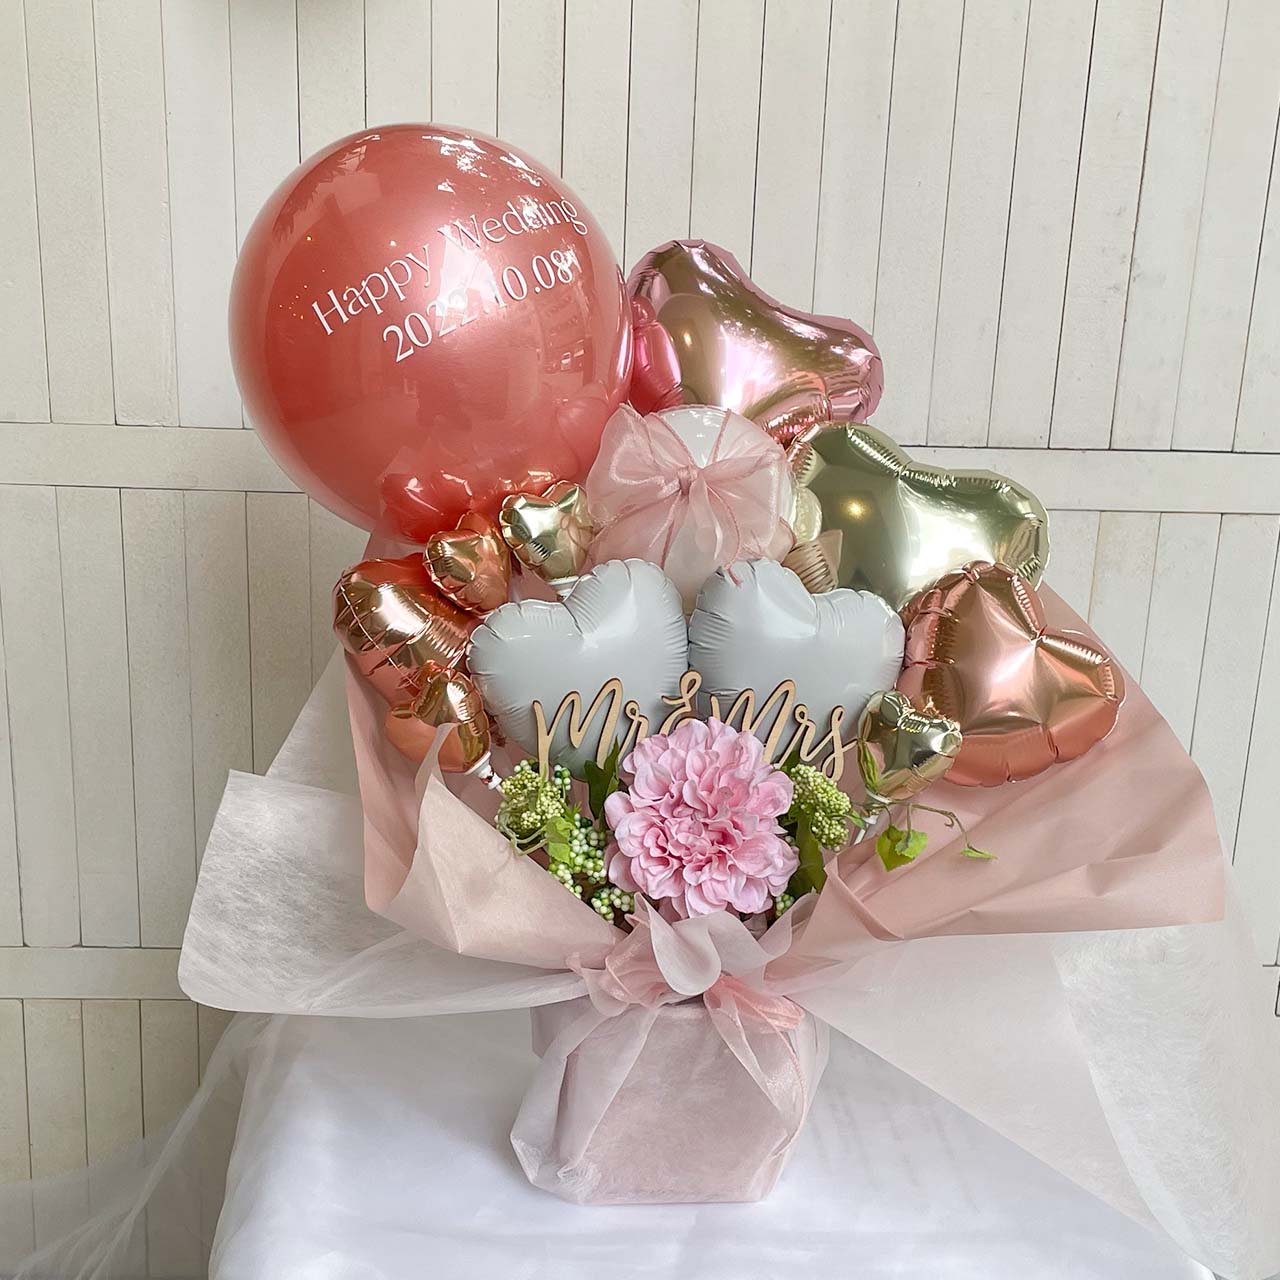 Angers Mr&Mrs Balloon Gift - Table top type - アンジェバルーン